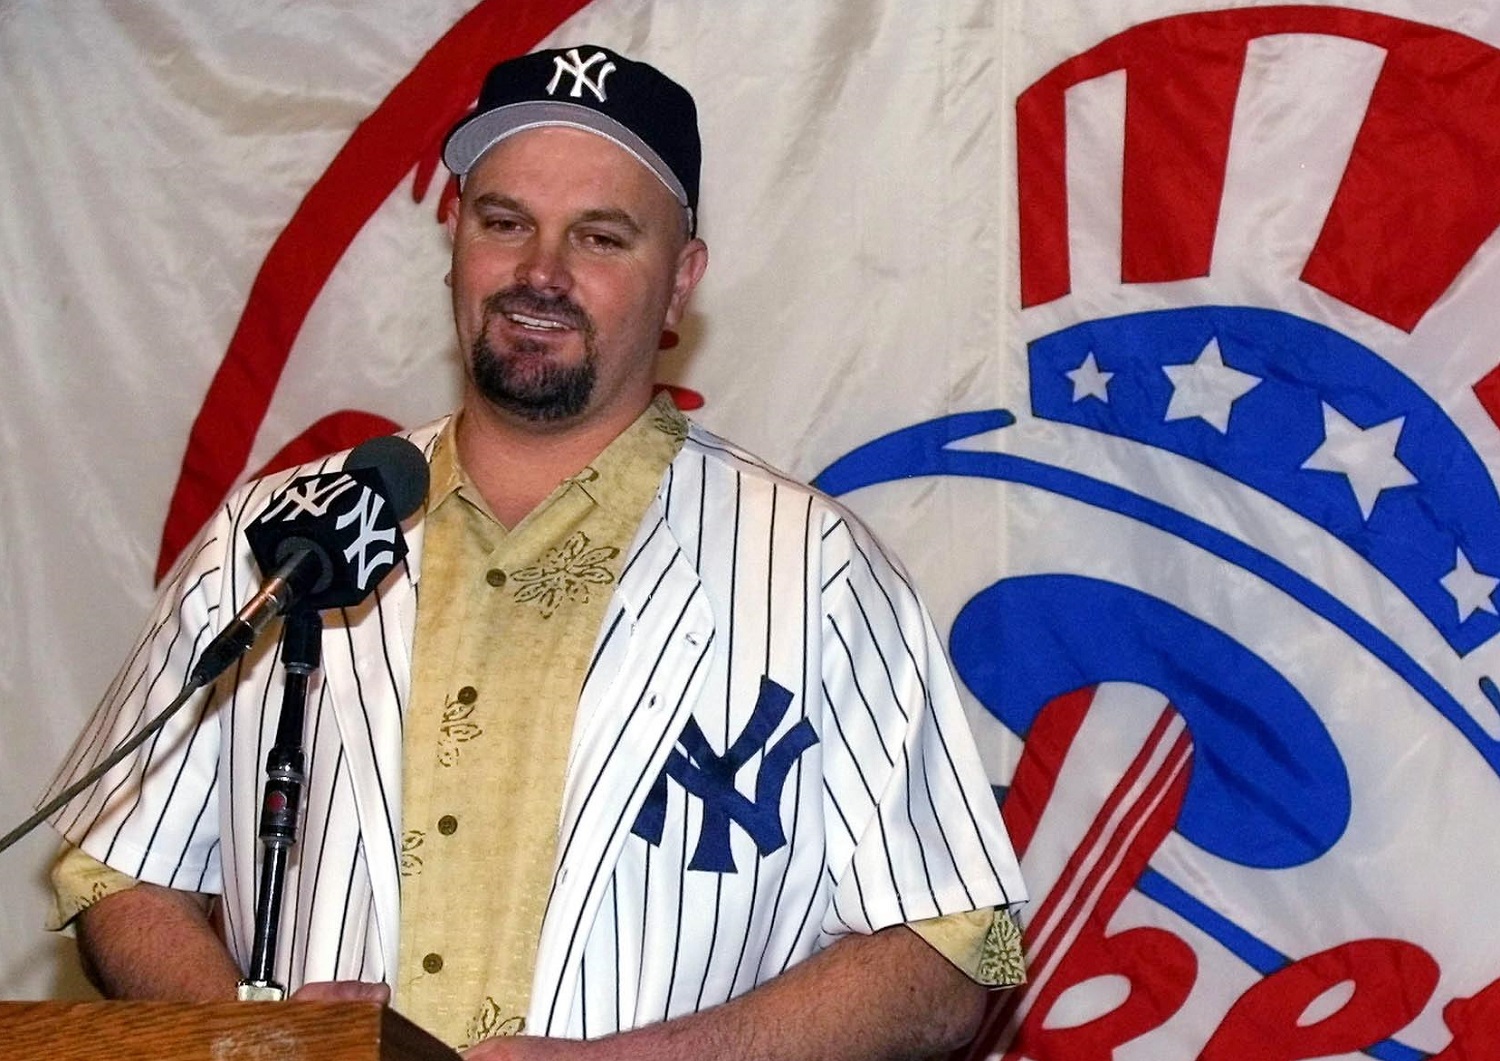 Left-hander David Wells smiles as he answers questions at a news conference announcing his signing for the second time with the Yankees in January 2002 at Yankee Stadium. | Matt Campbell/AFP via Getty Images